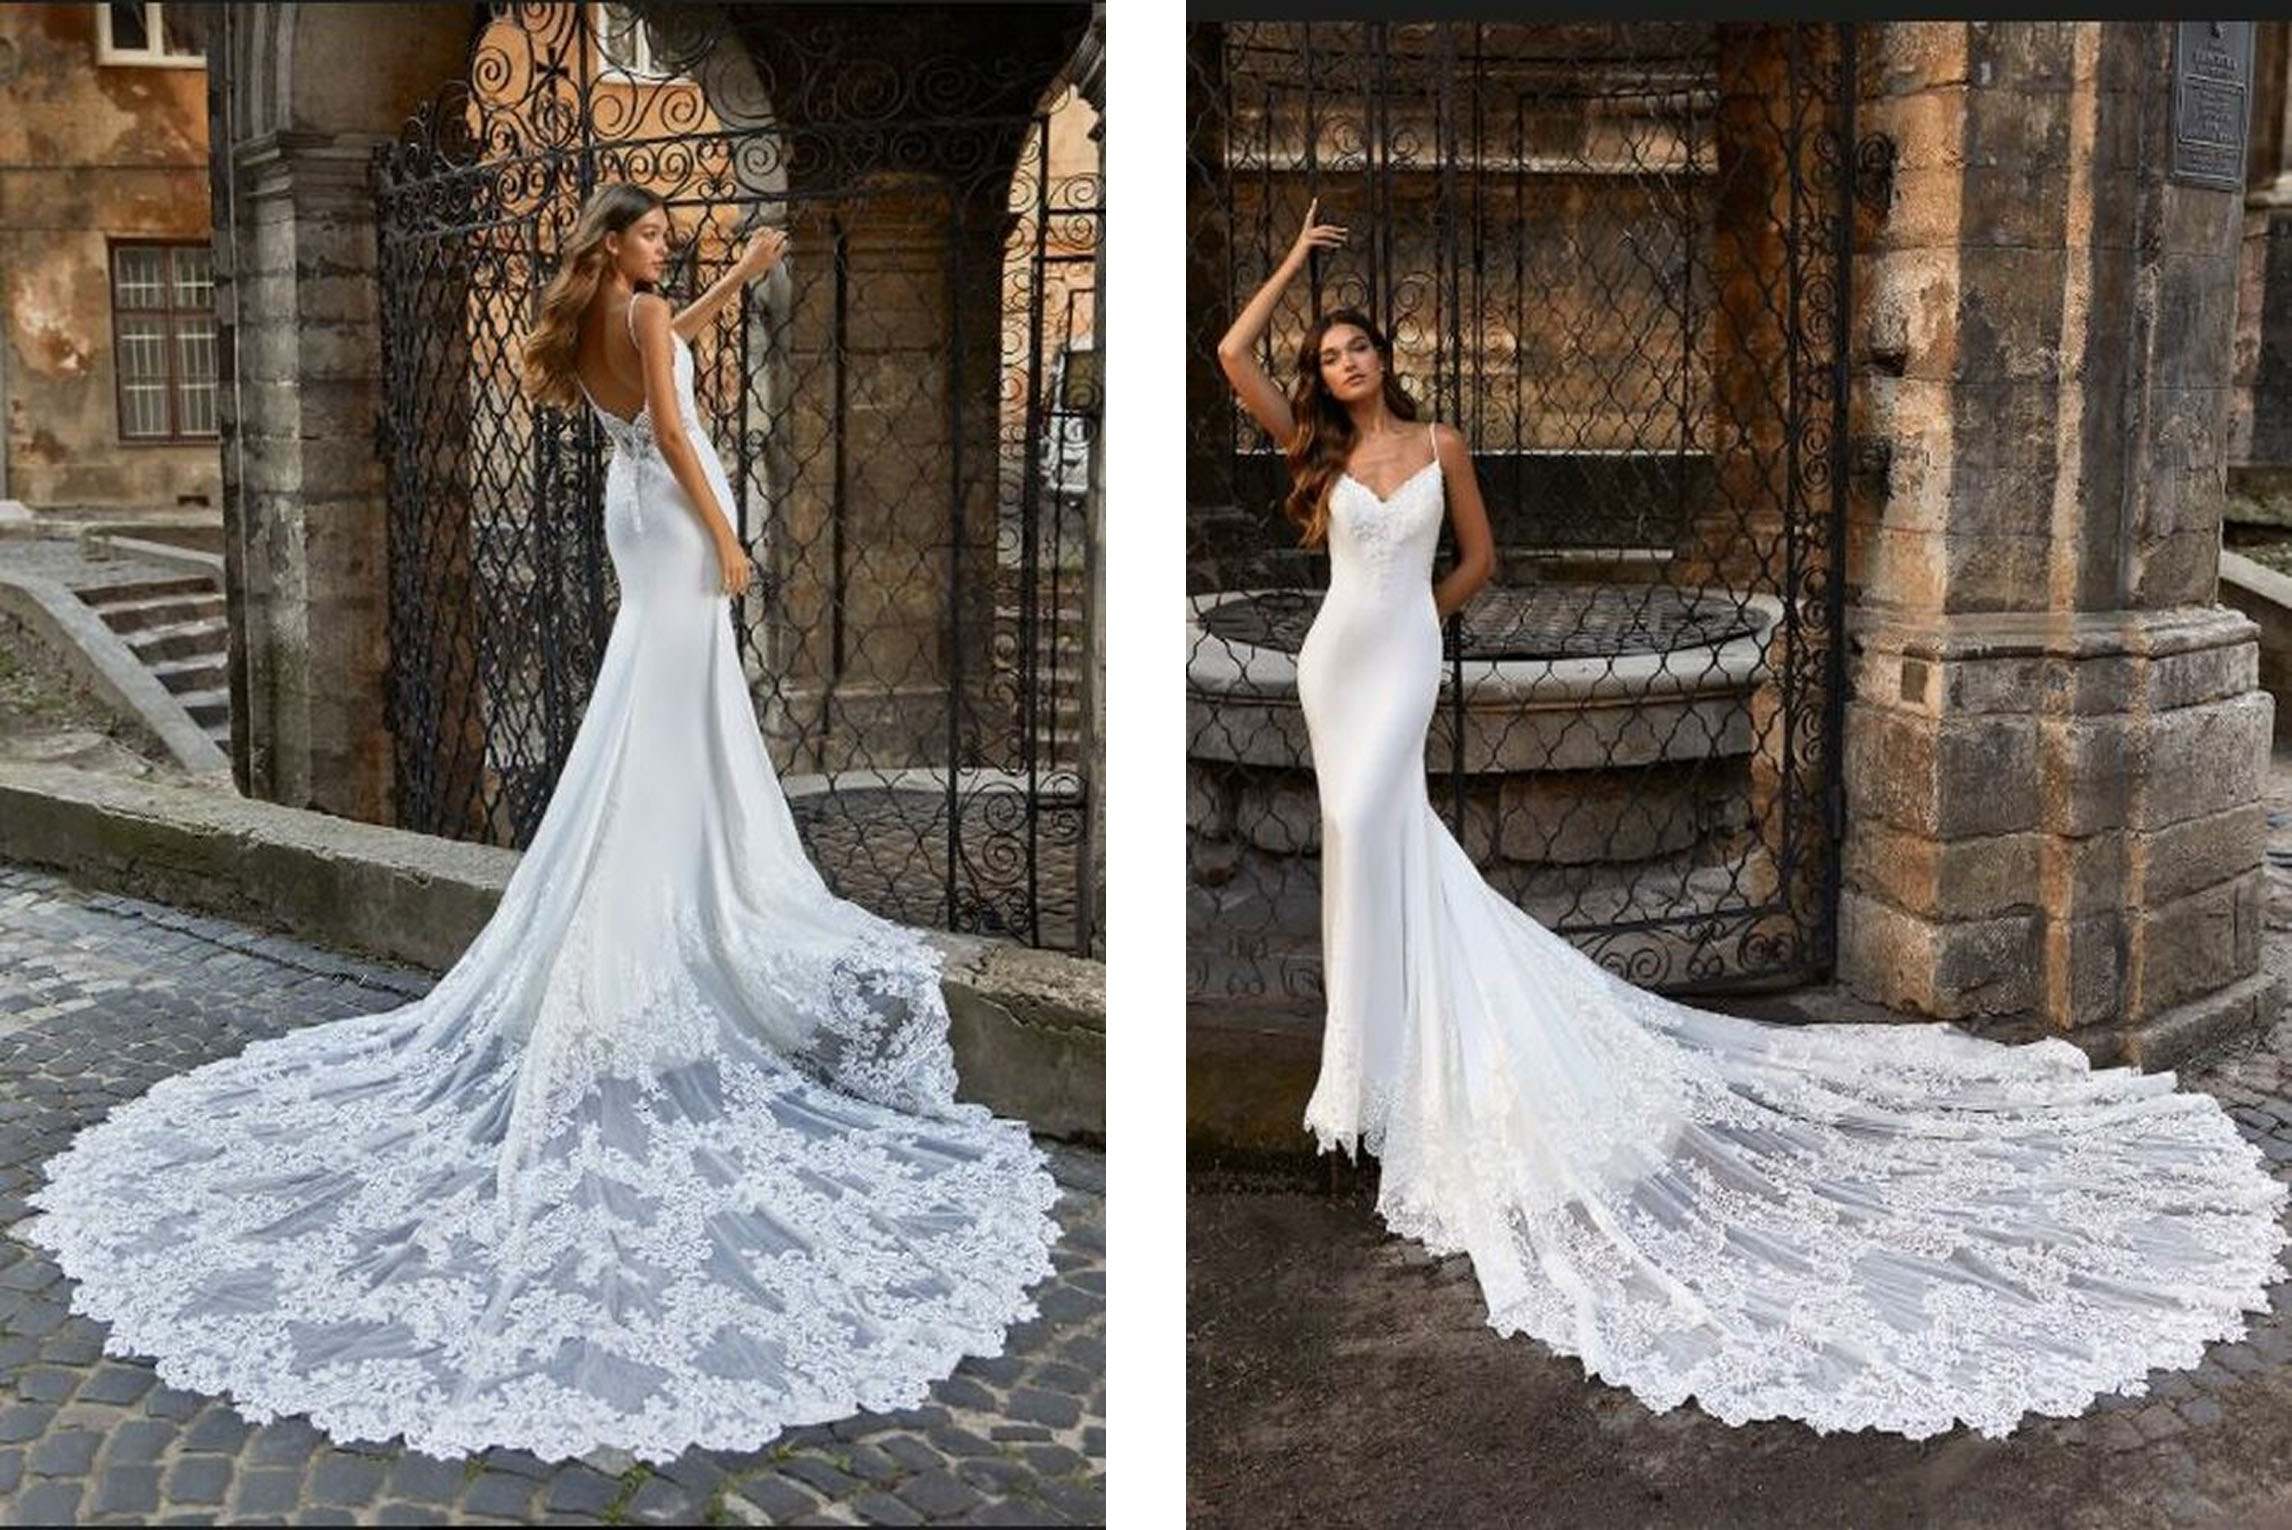 Adrianna by Moonlight Bridal Sleek White Crepe Mermaid Wedding Dress with Open Back, Illusion Buttons, Full Lace Train and Lace applique Detailing on V-Neckline at Fashionably Yours